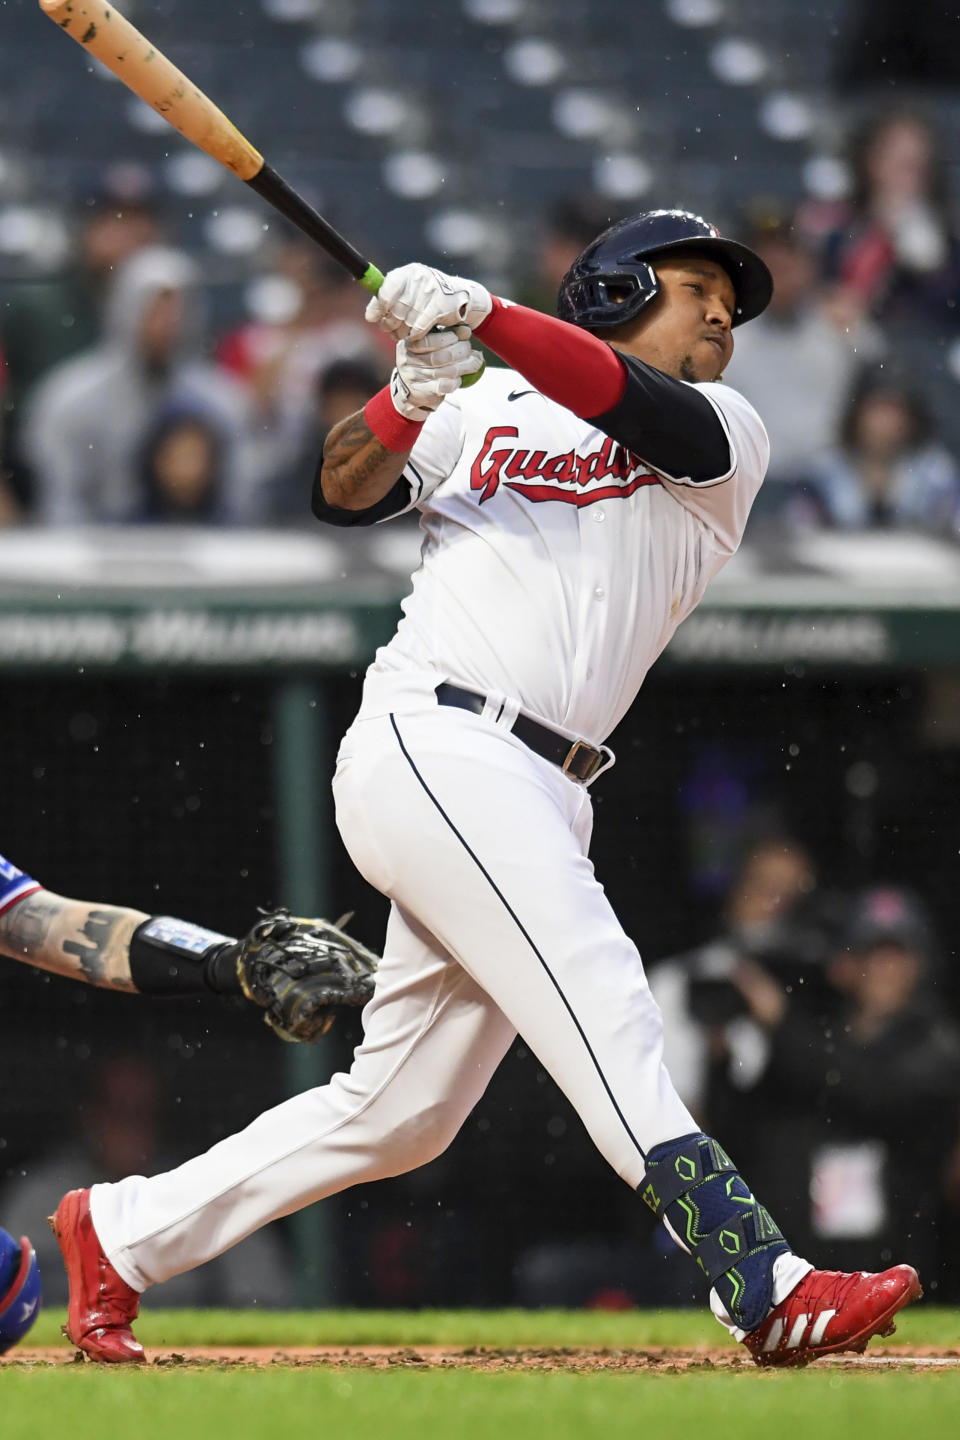 Cleveland Guardians' José Ramírez watches his RBI double against the Texas Rangers during the third inning of a baseball game, Wednesday, June 8, 2022, in Cleveland. (AP Photo/Nick Cammett)